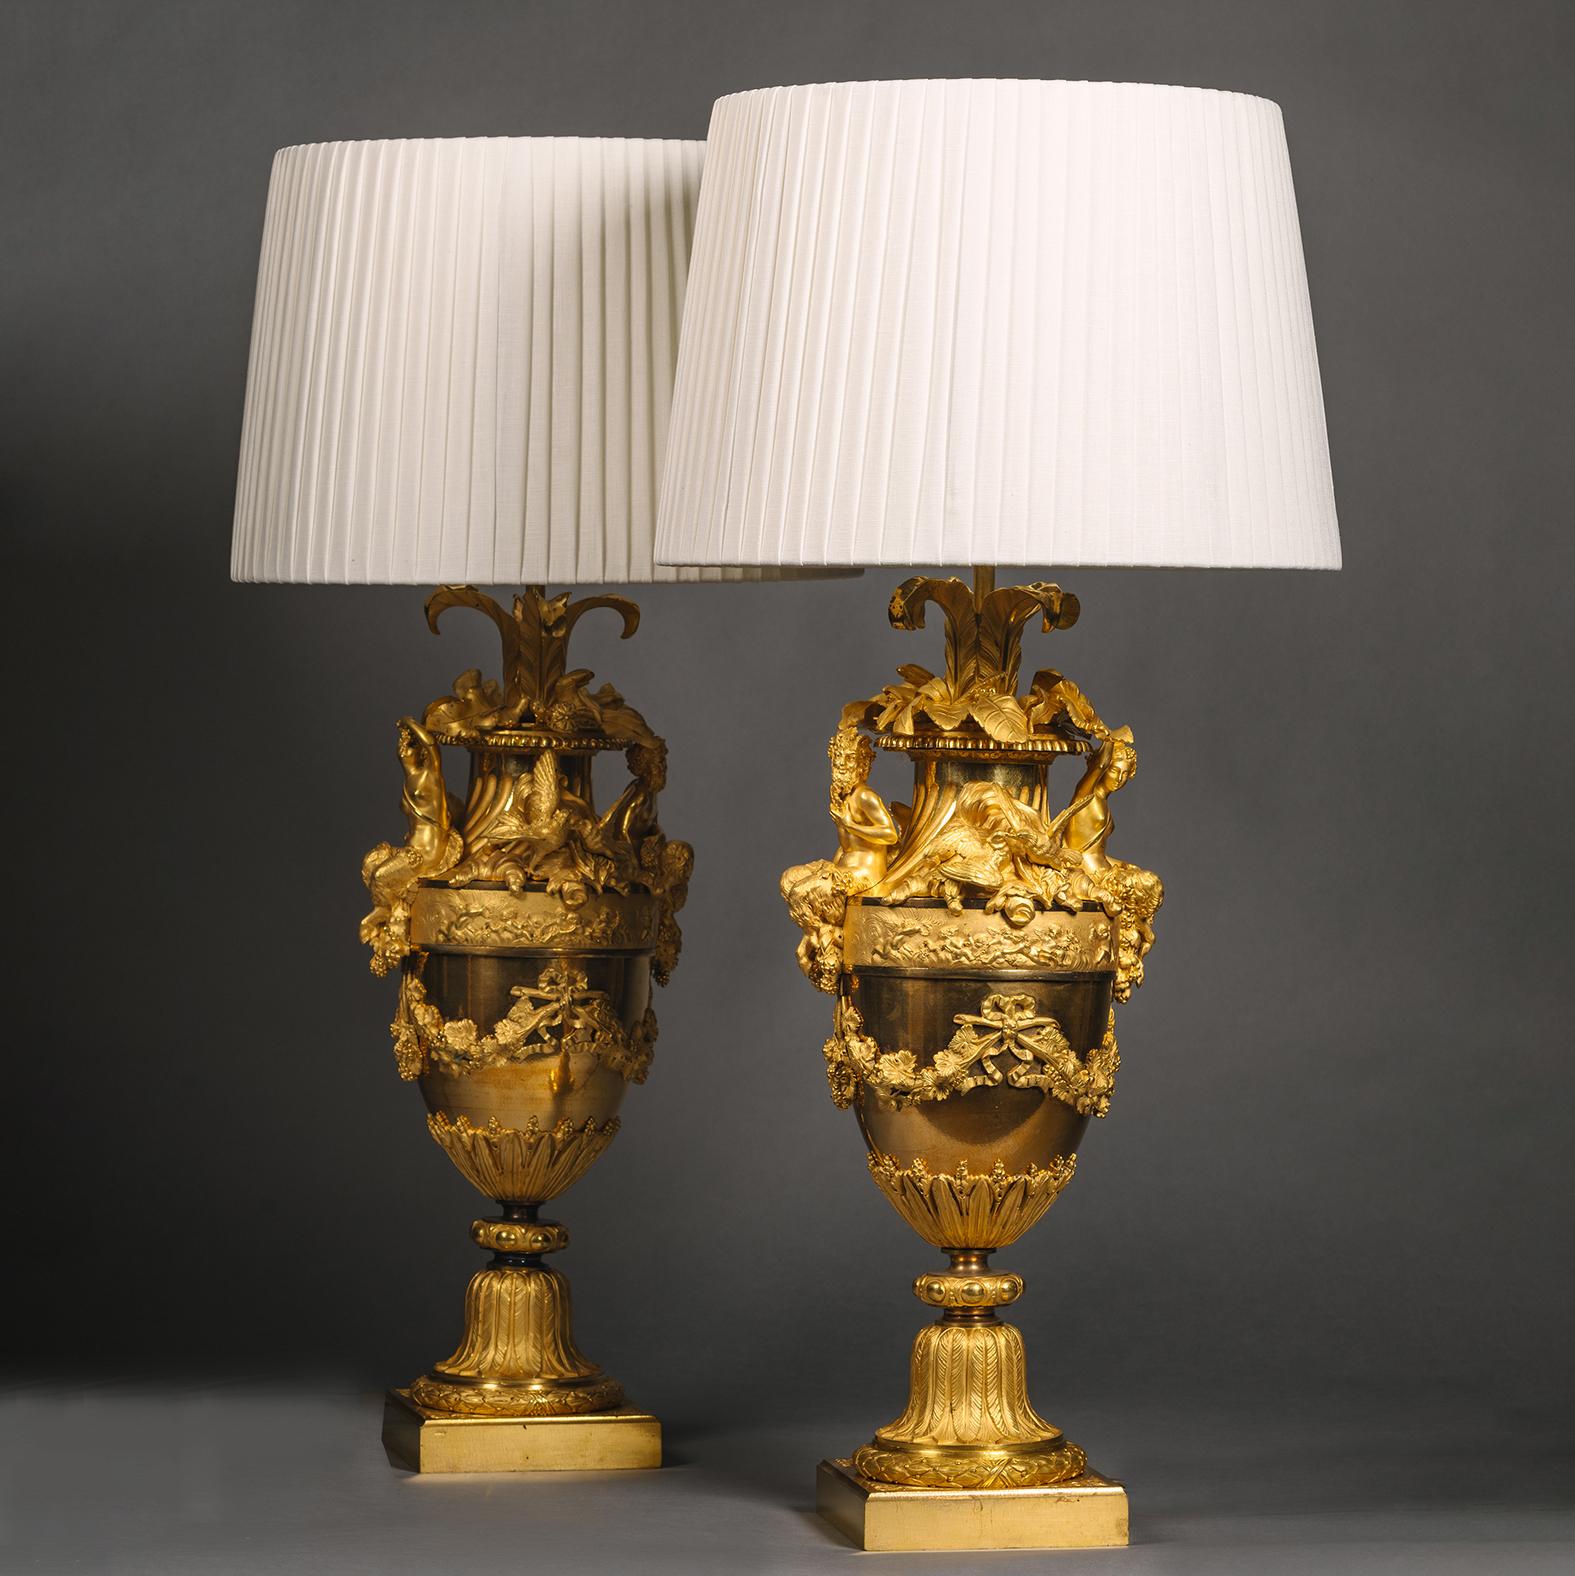 A Pair of Fine Napoleon III Period Gilt-Bronze Vases, Mounted as Table Lamps, By Henri Picard. 

These vases exhibit finely detailed bronze work with superb matte and burnished gilding. They are conceived in the Louis XVI stye and adorned with